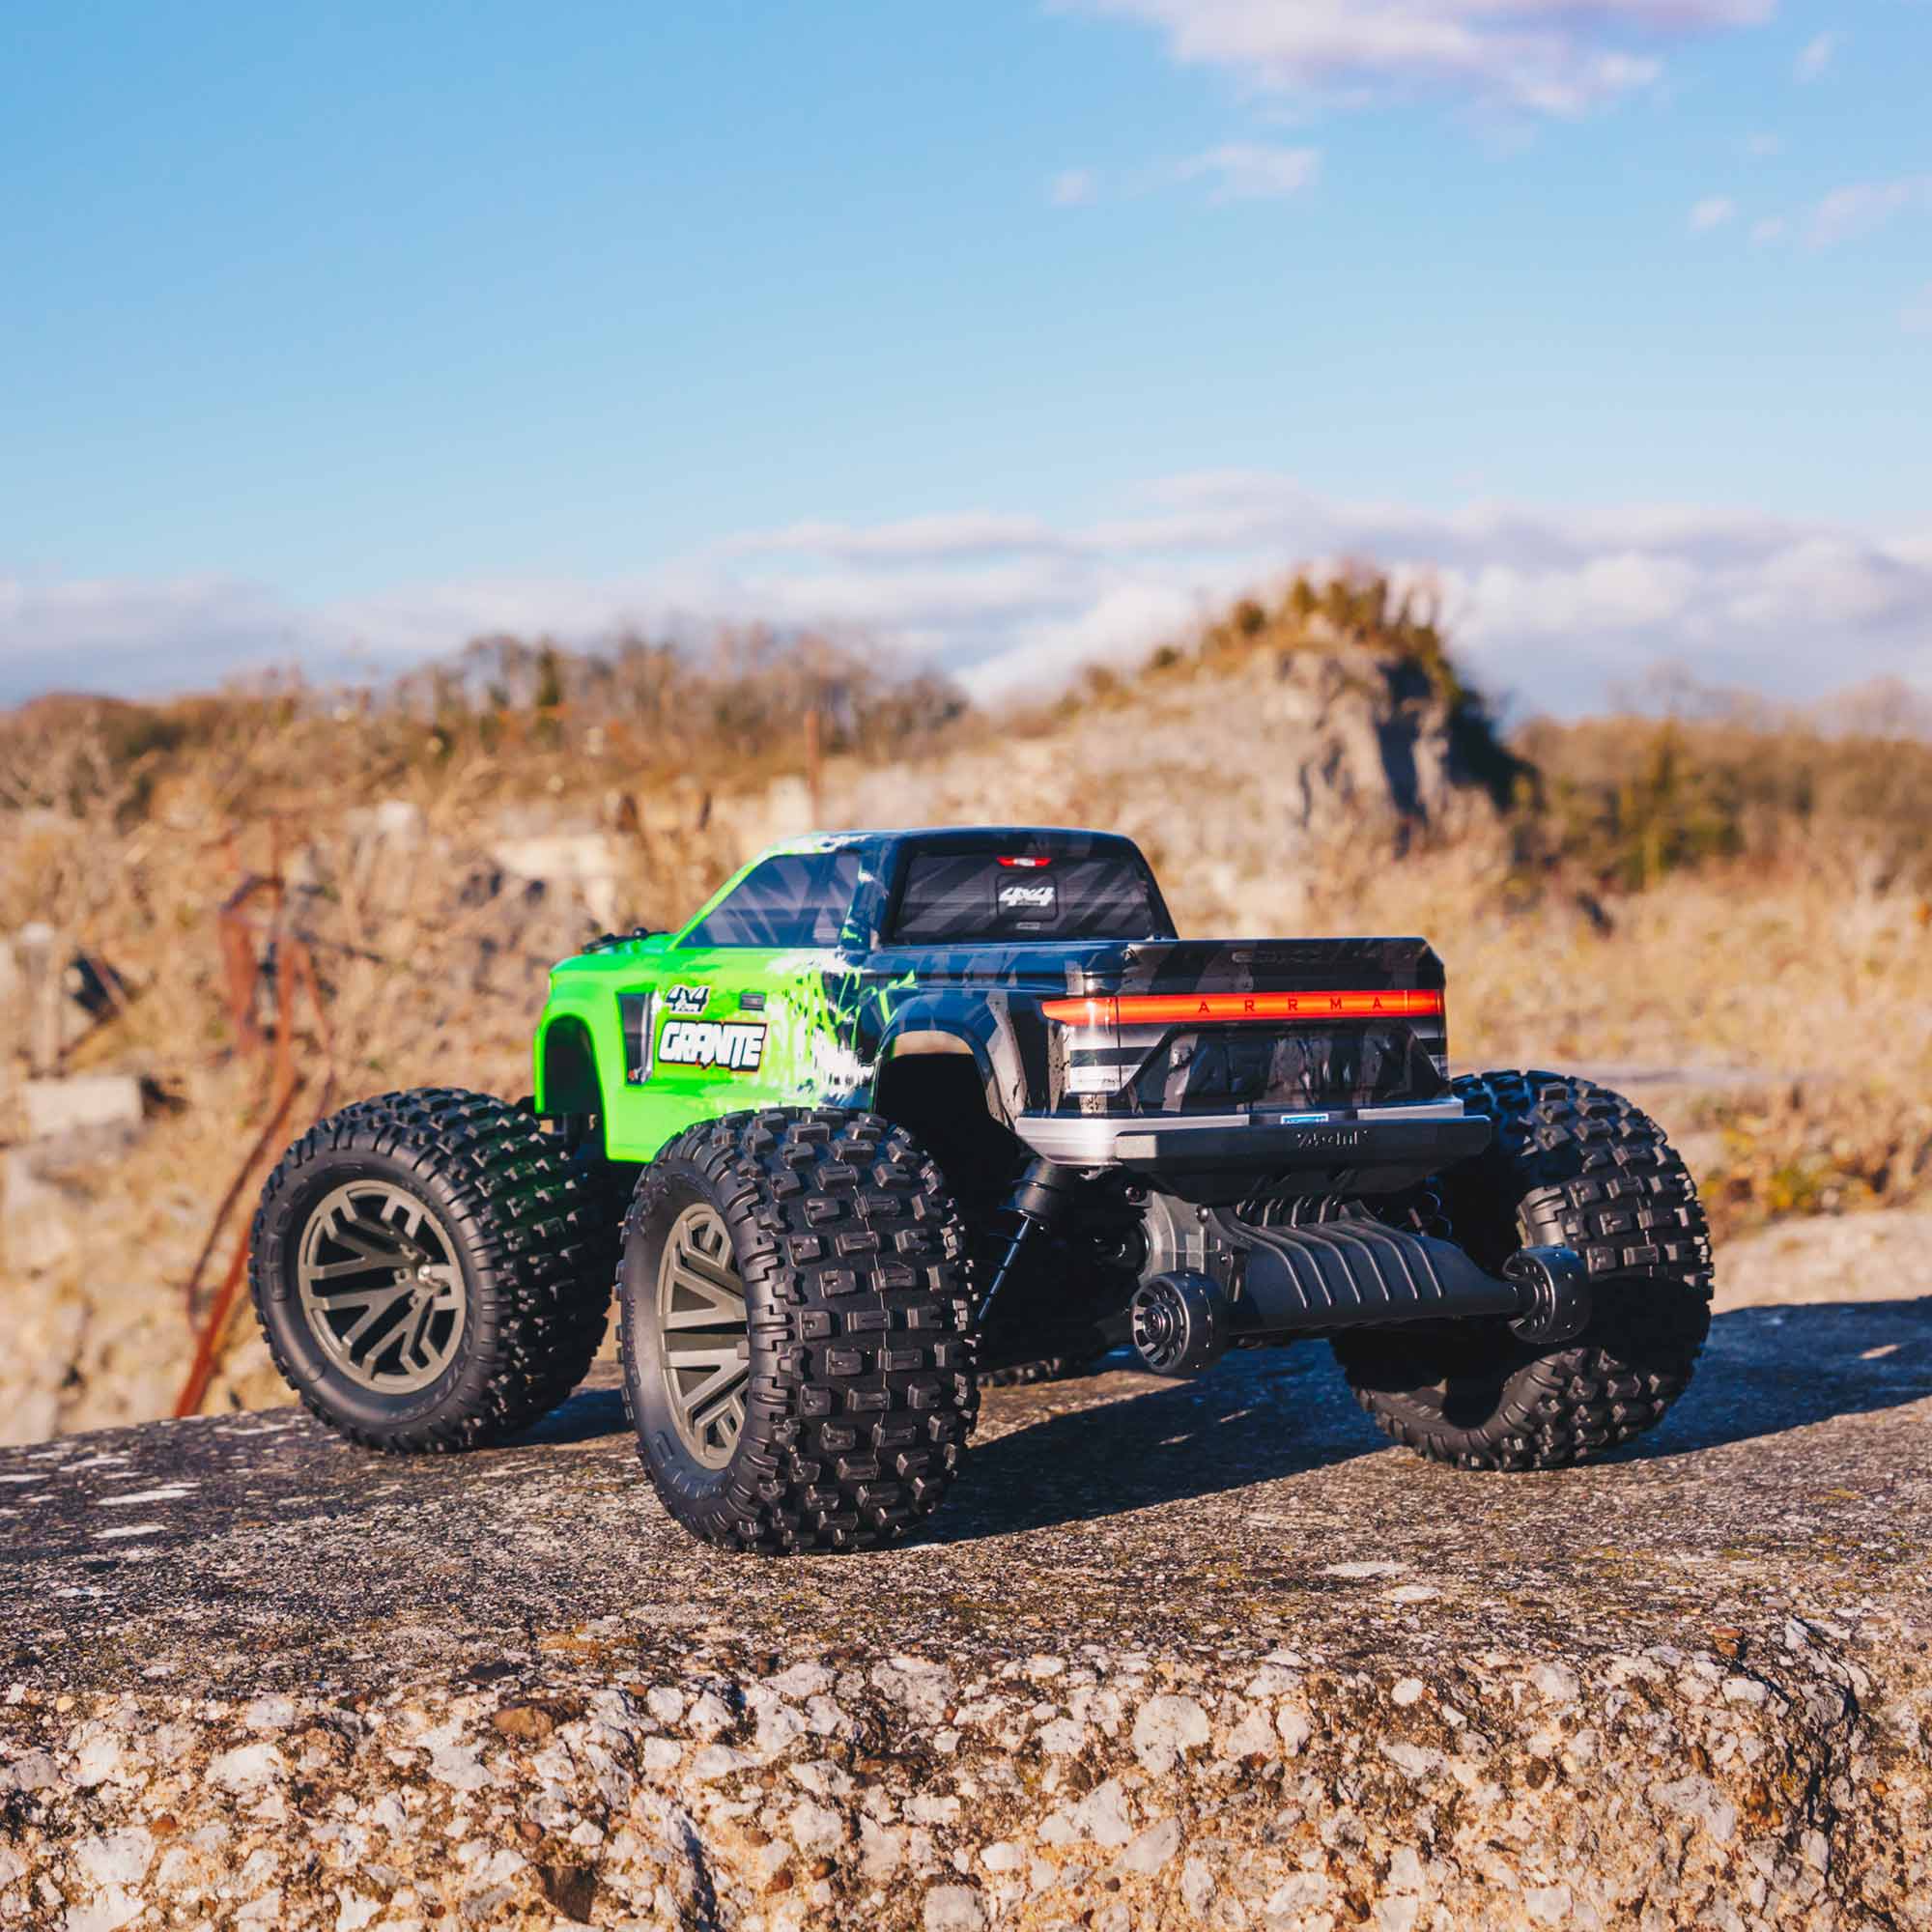 ARRMA RC Truck 1/10 GRANITE 4X4 V3 3S BLX Brushless Monster Truck RTR Battery and Charger Not Included Green ARA4302V3T1 Trucks Electric RTR 1/10 Off-Road - image 4 of 11